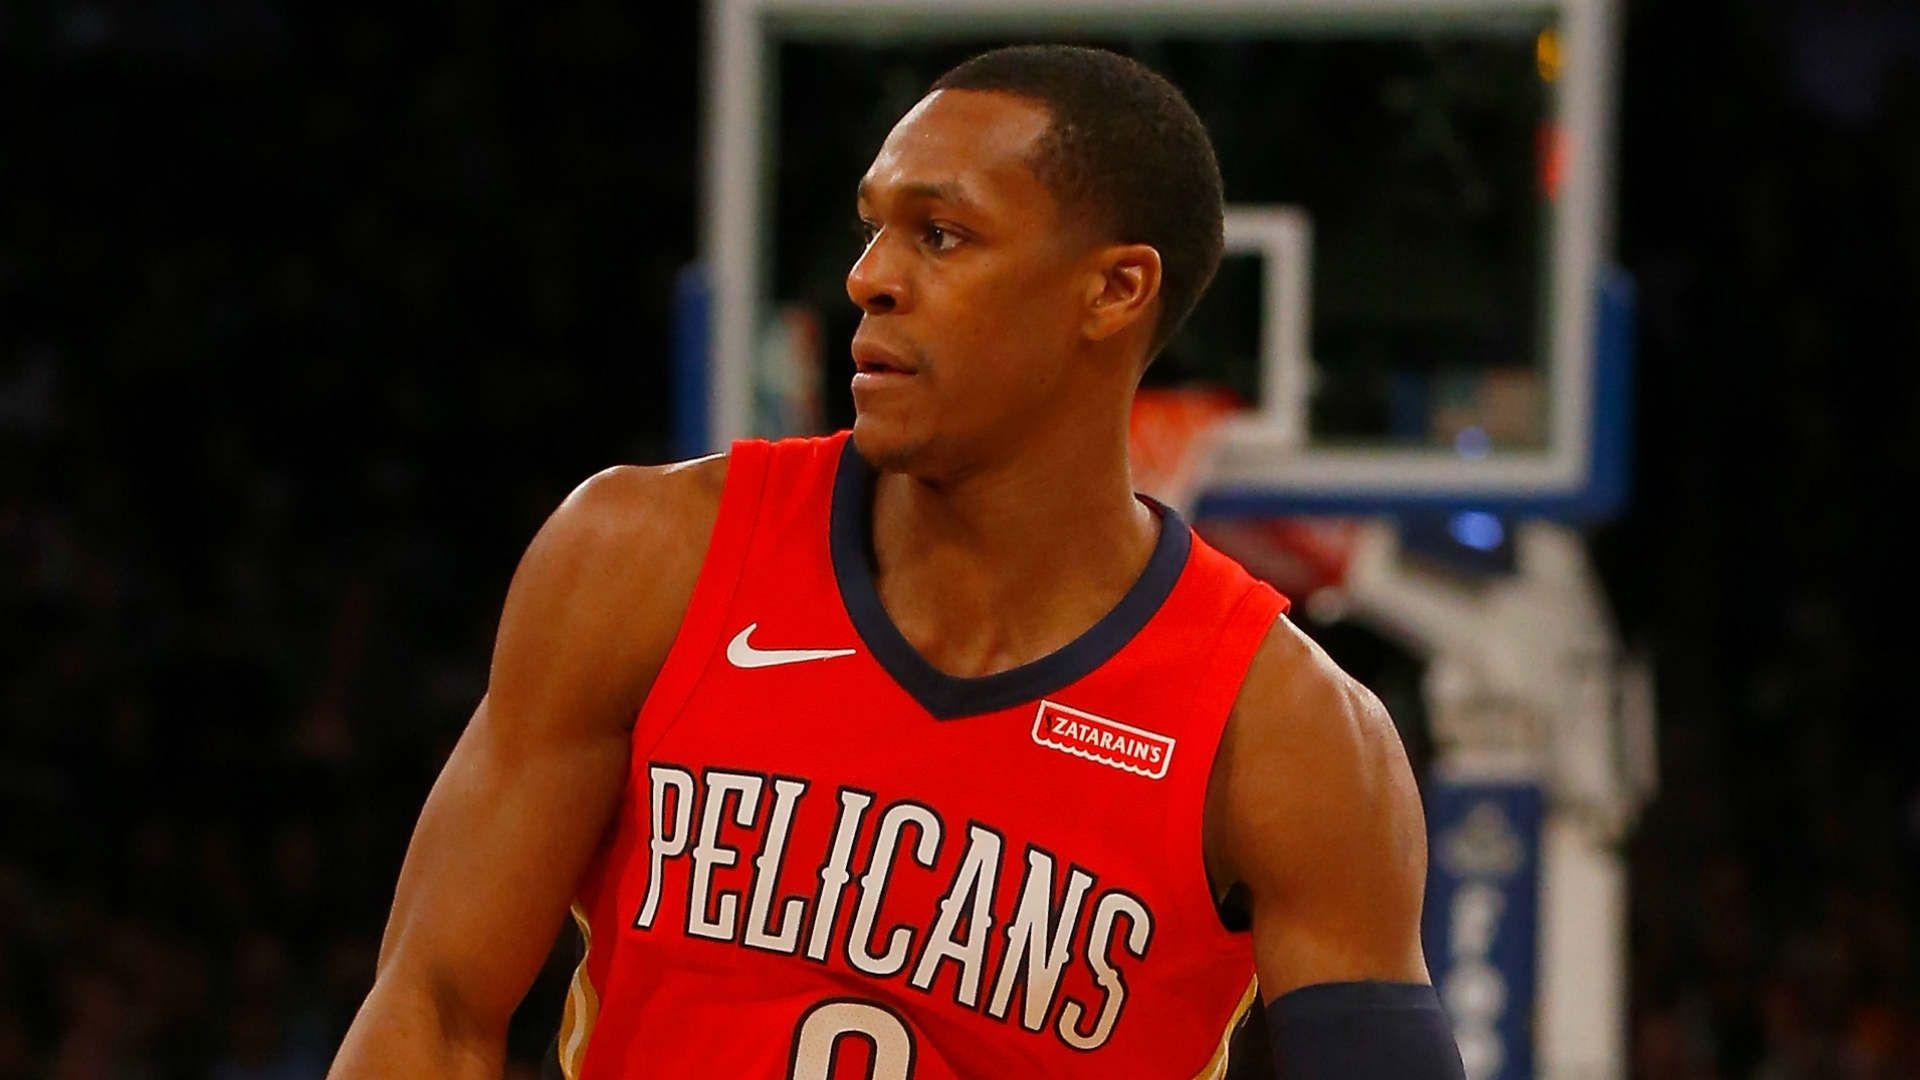 Pelicans PG Rajon Rondo to miss game vs. Rockets with sprained